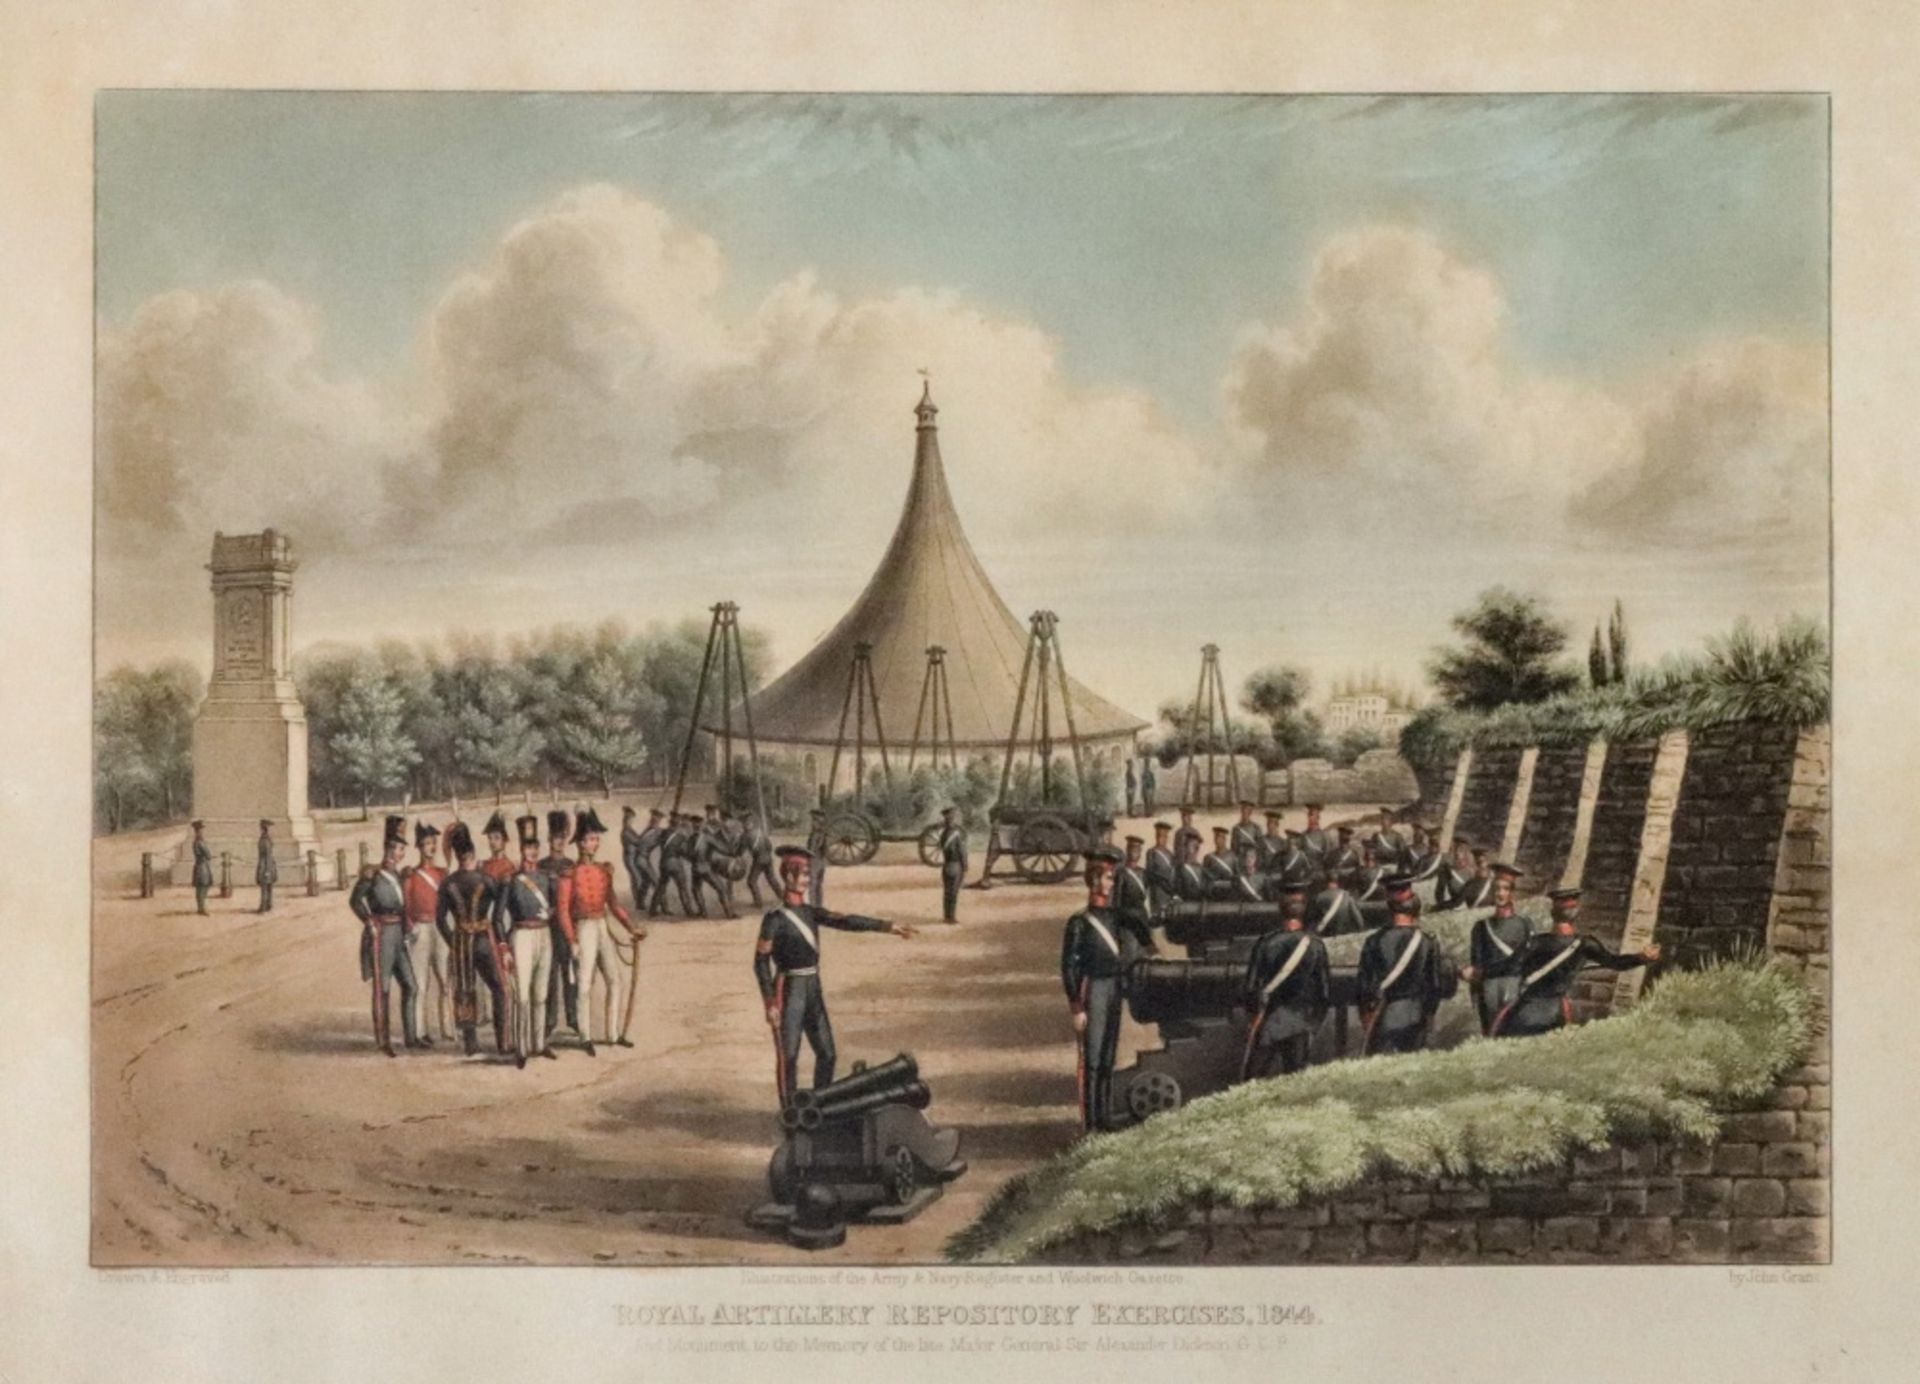 After John Grant, Royal Artillery Repository Exercises 1844, colour engraving by John Grant,